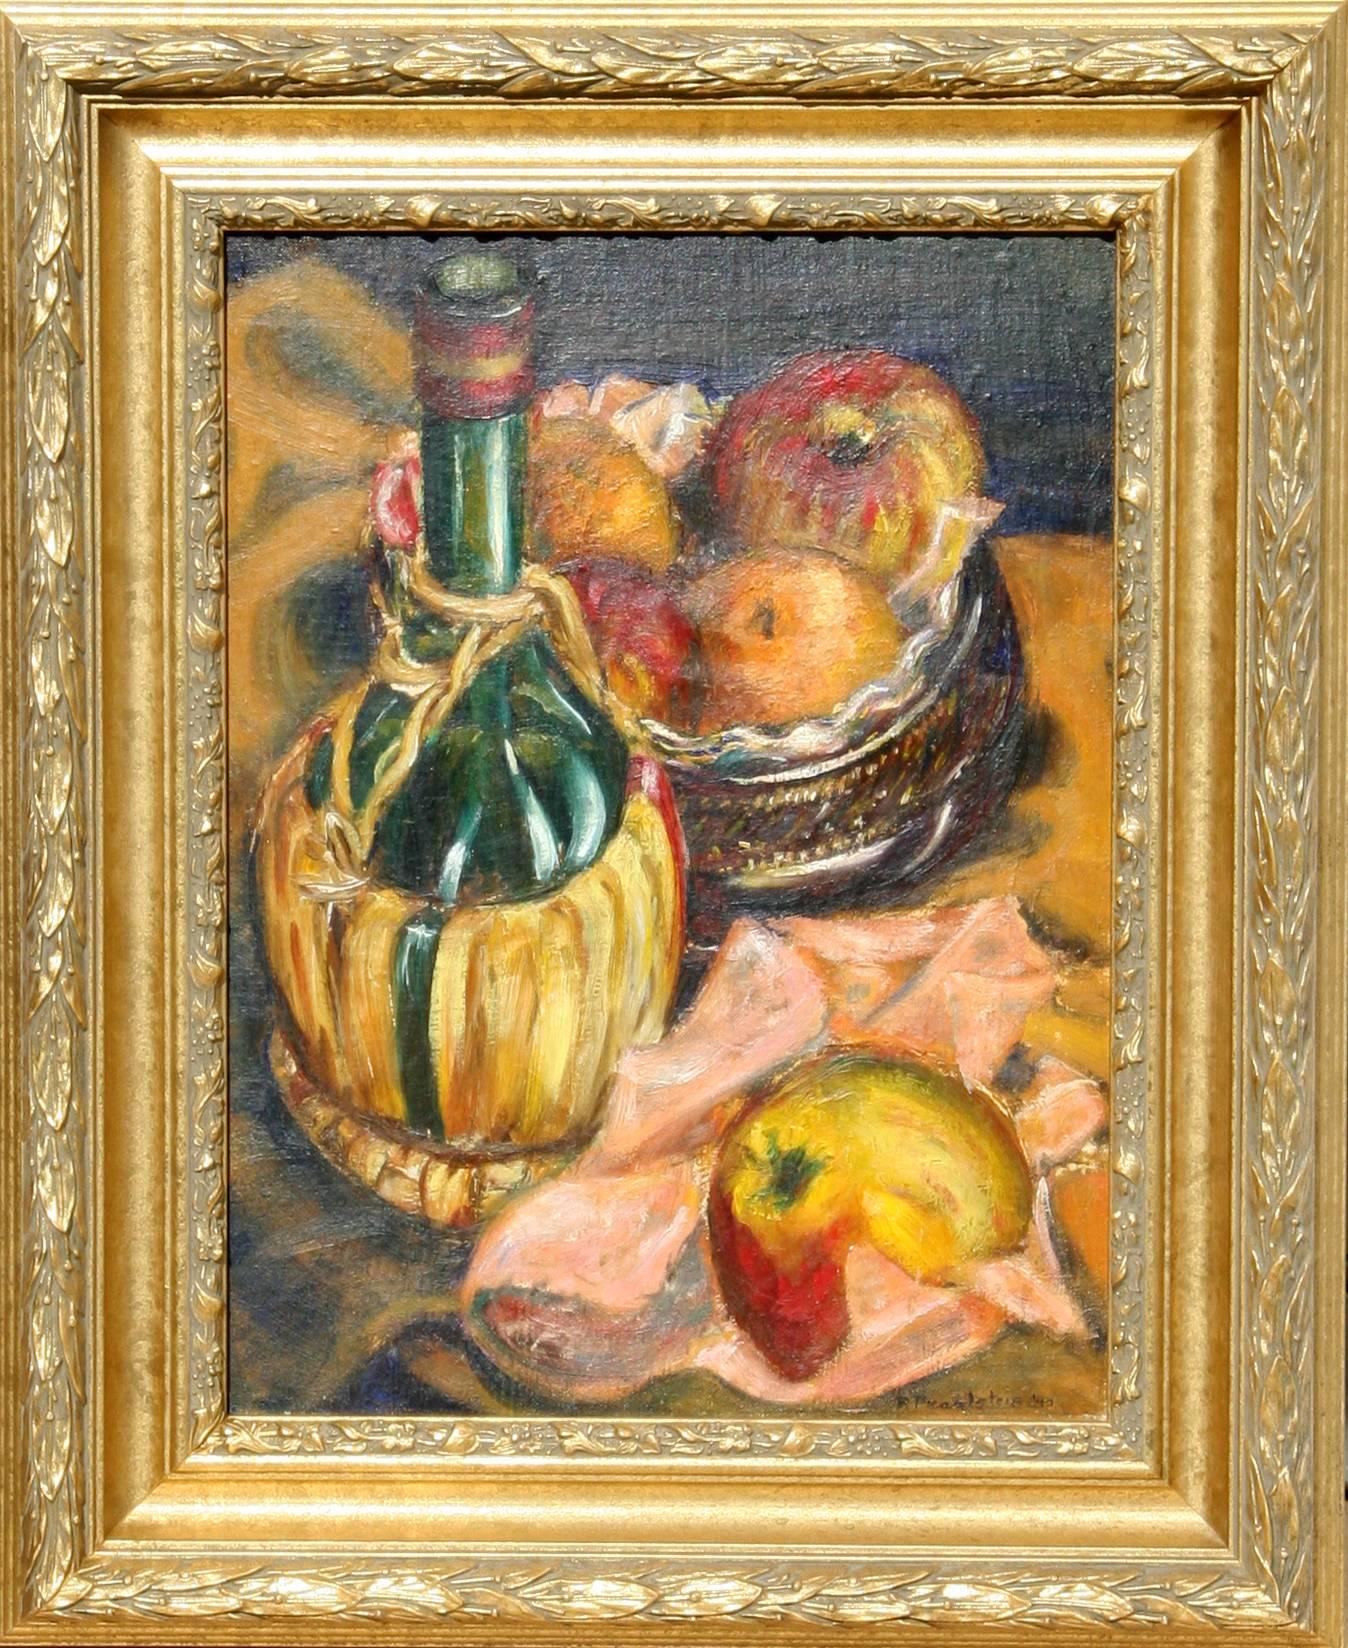 Italian Still Life, Early Painting by Philip Pearlstein 1940